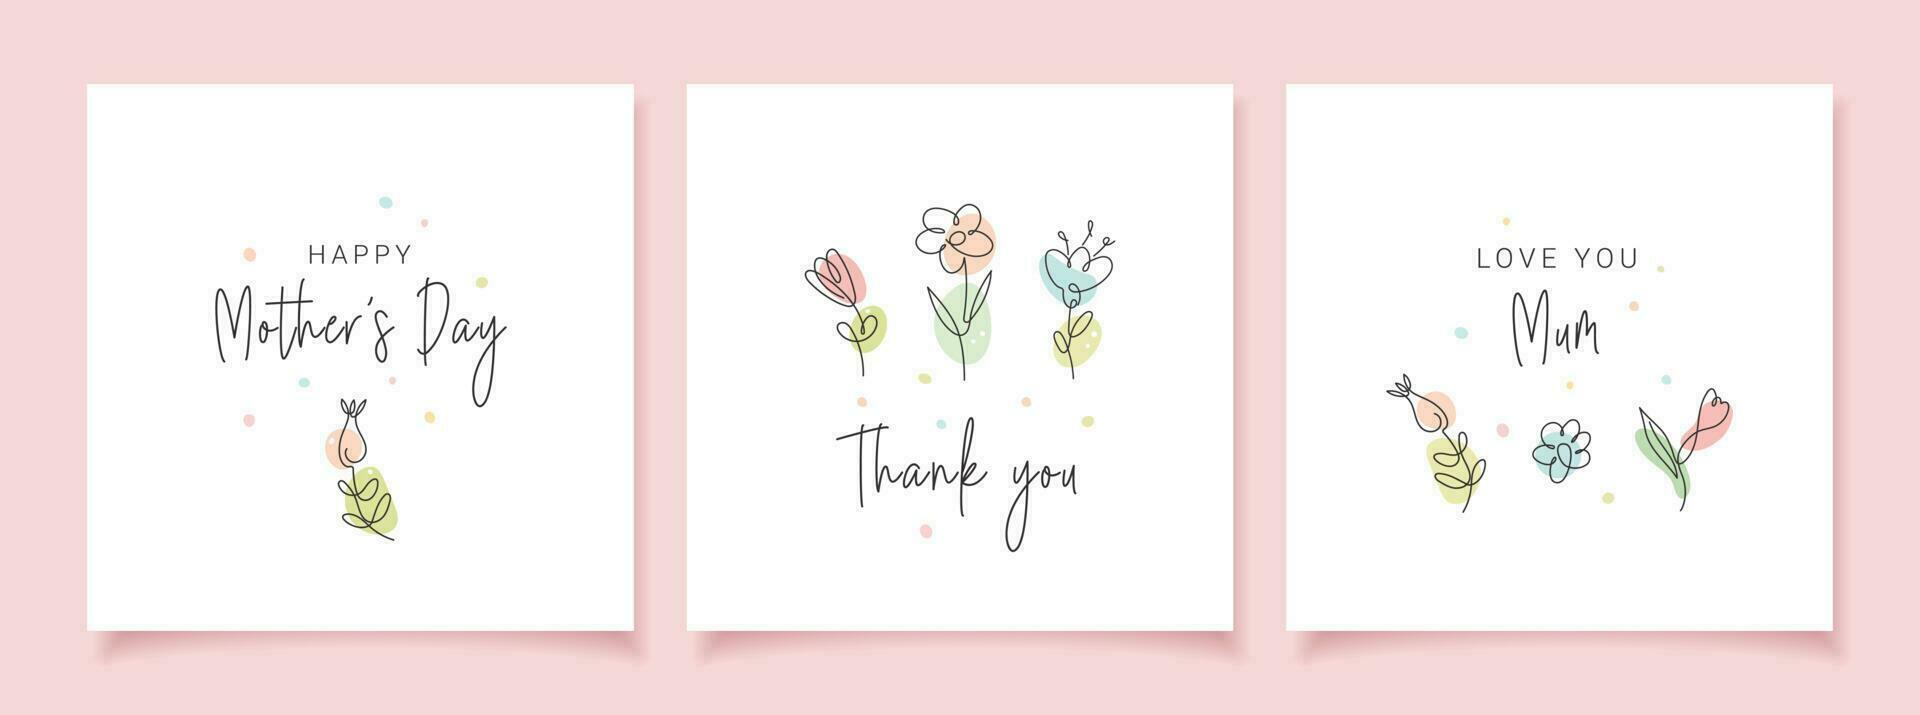 Happy Mother's Day. Set of greeting cards with colorful cute flowers on white background. Line art. Continuous line minimalist style illustration. vector